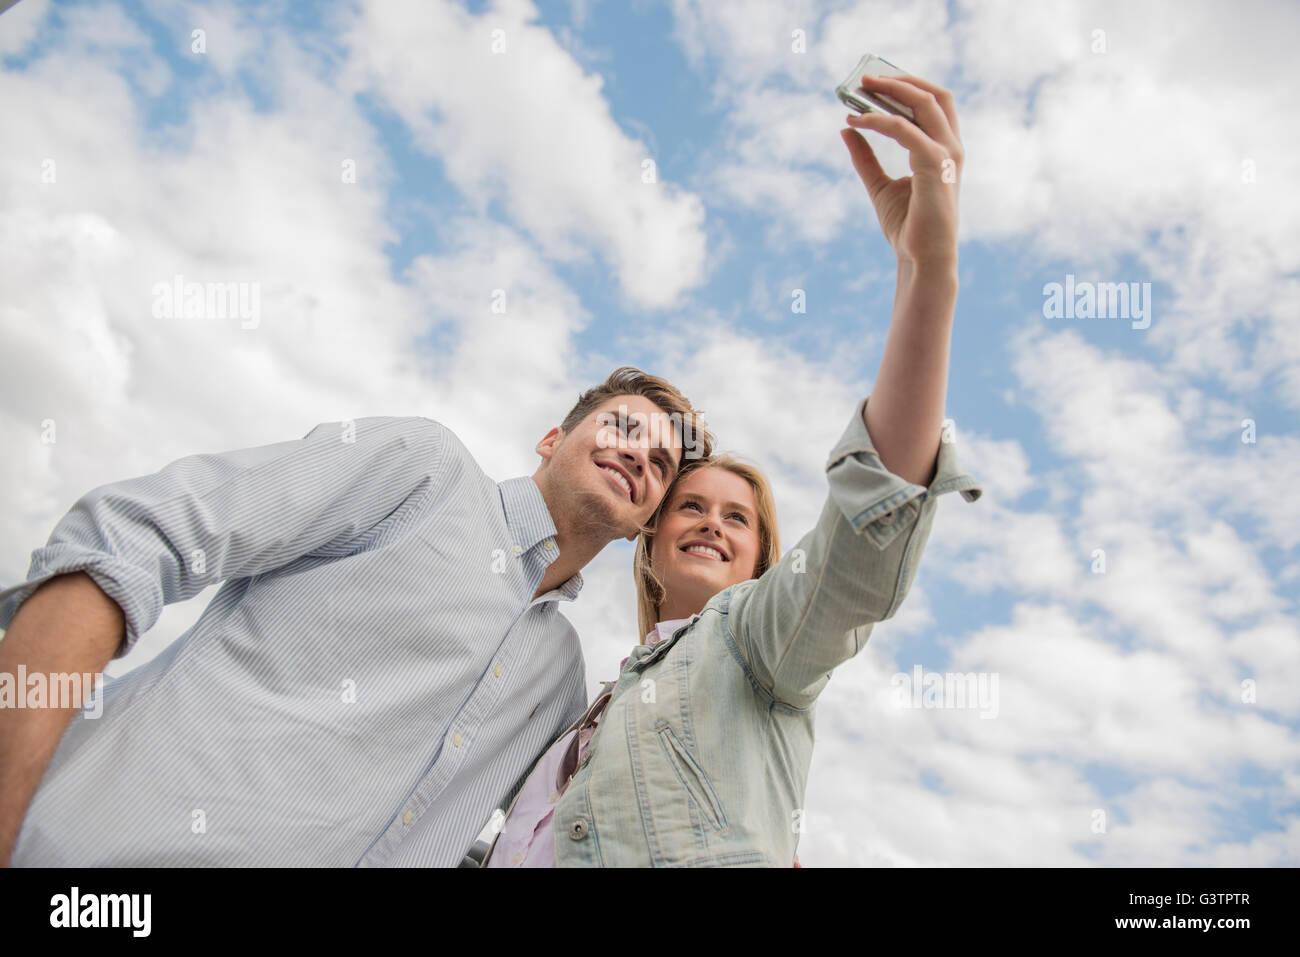 A young couple taking a selfie standing on the Millennium Bridge in London. Stock Photo